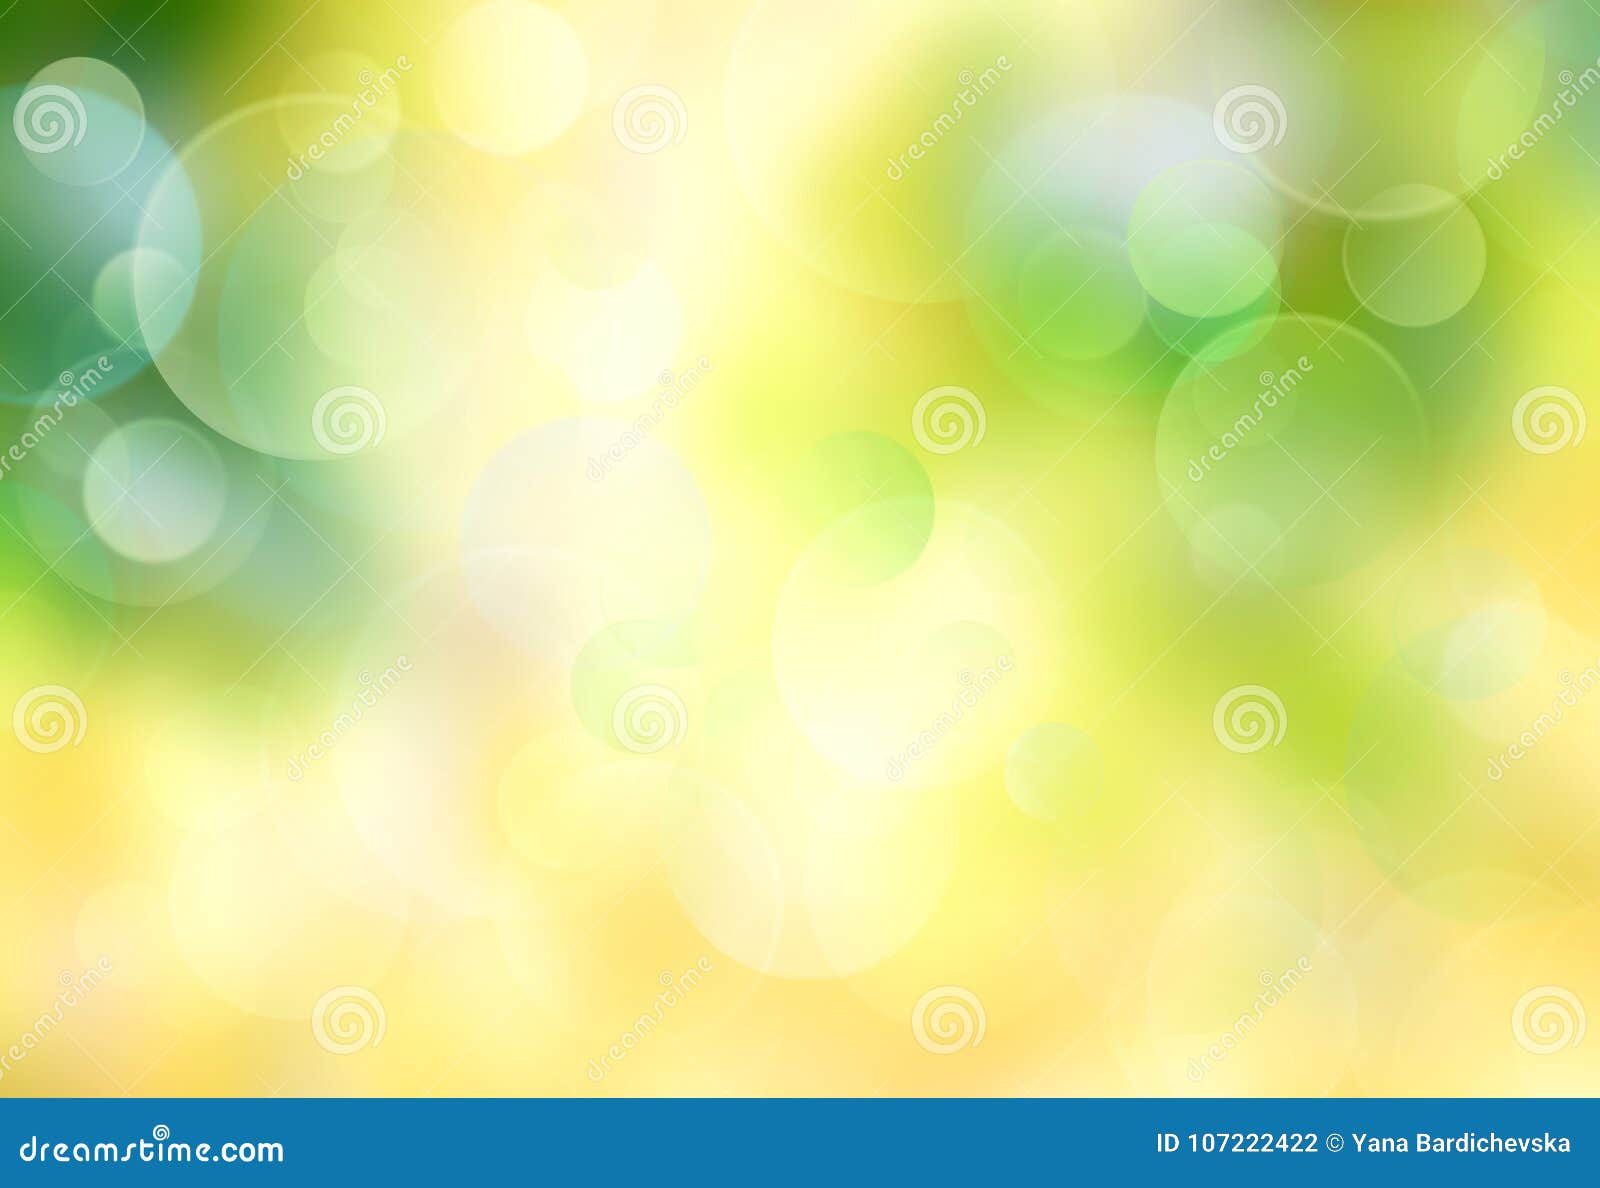 Yellow Green Spring Blurred Background. Stock Illustration - Illustration  of green, foliage: 107222422